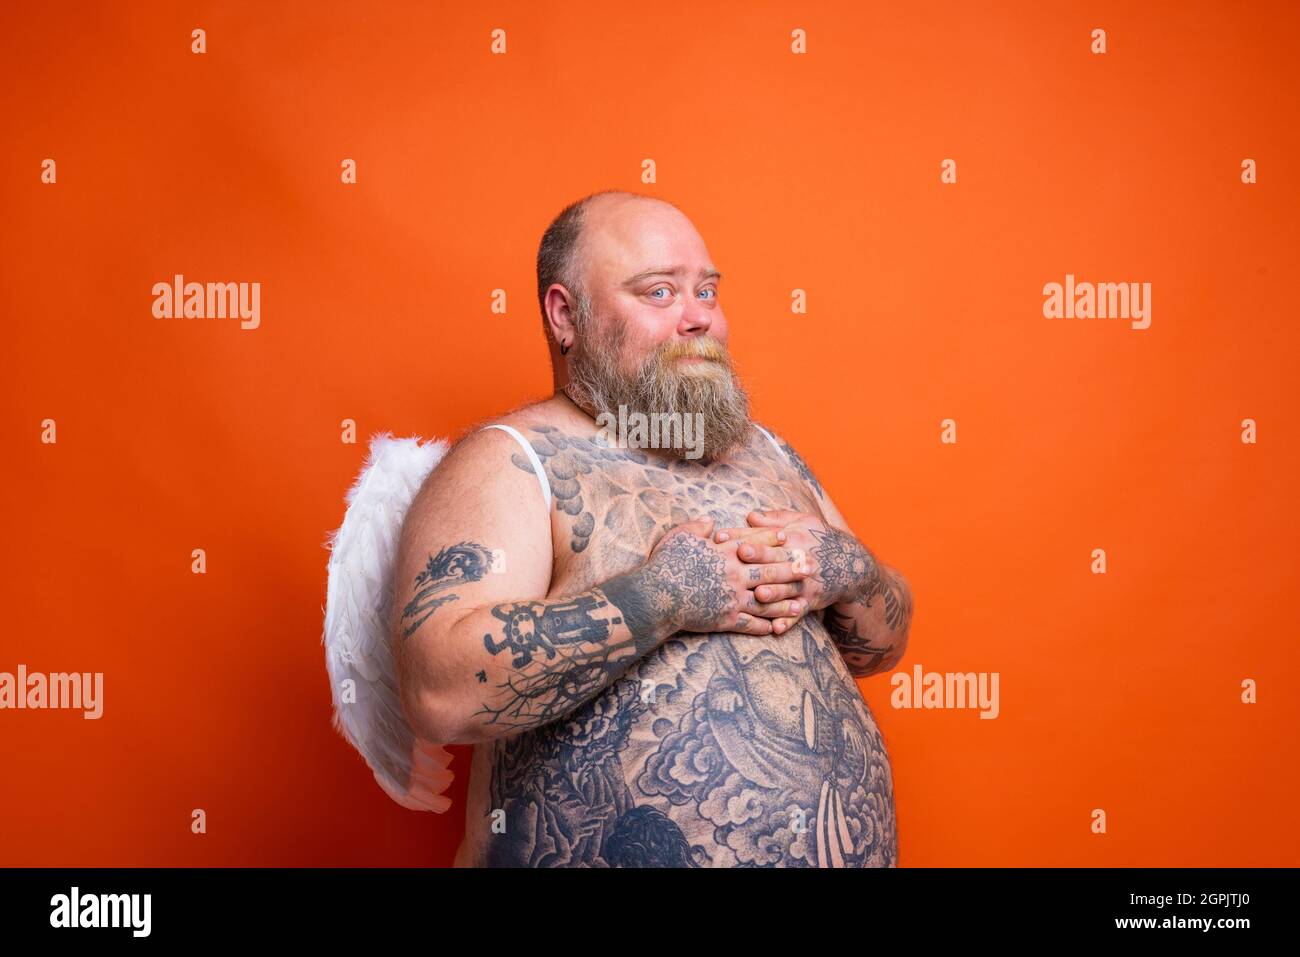 Fat man with beard ,tattoos and wings acts like an angel Stock Photo